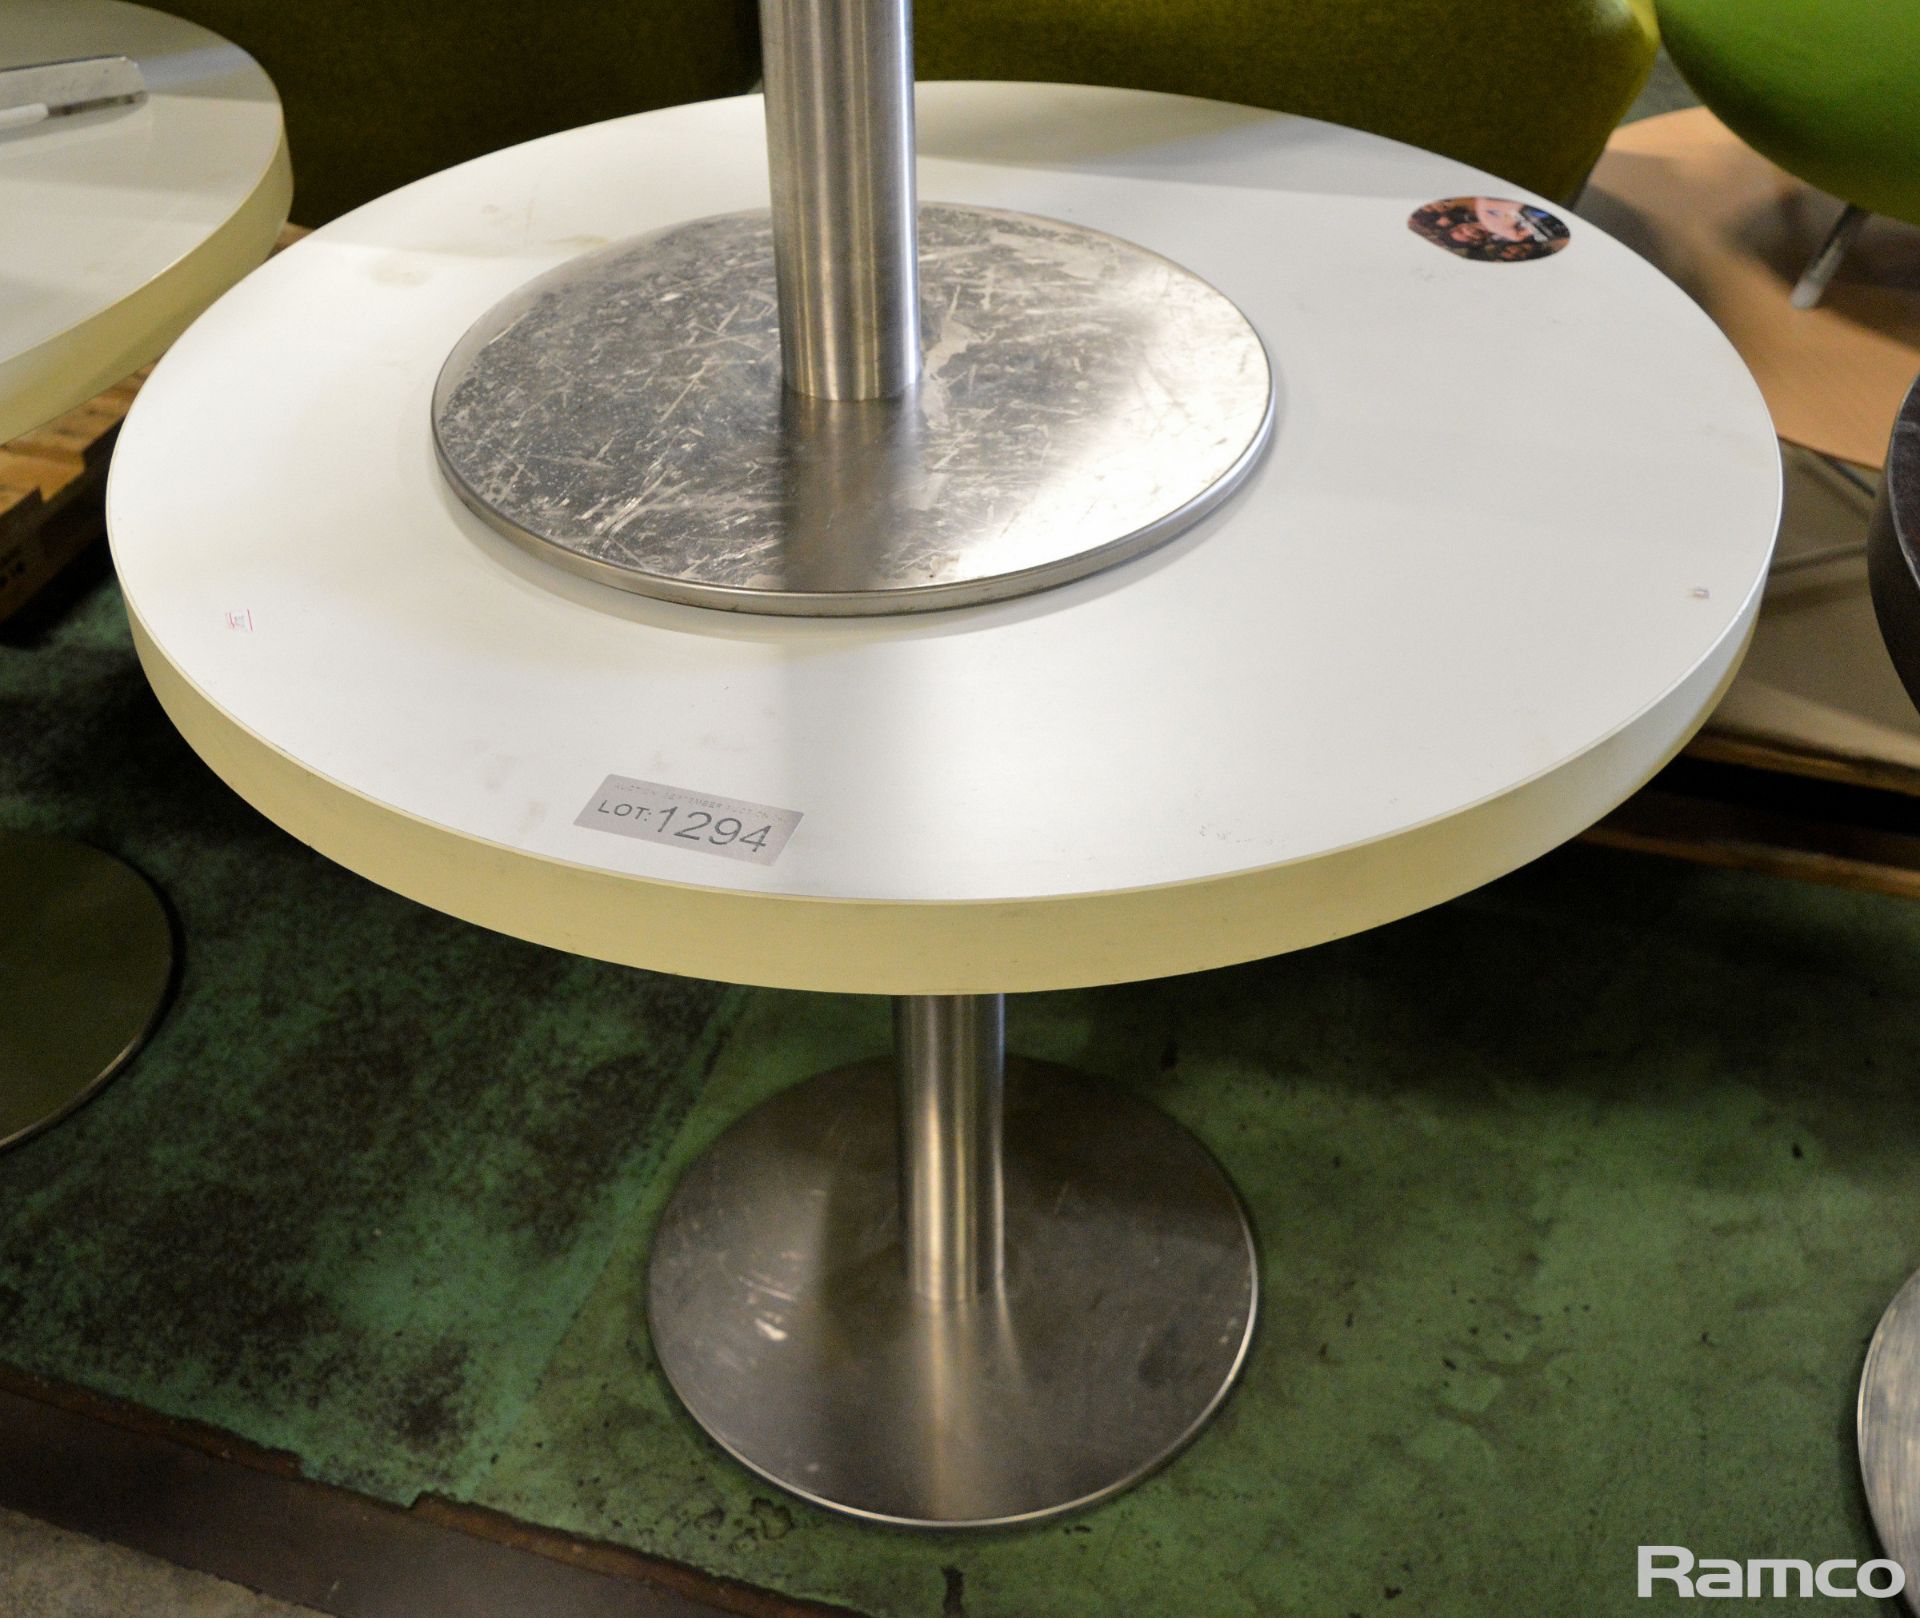 2x Circular Tables - Wood Effect - White - Diameter 900 x H750mm - Image 2 of 2